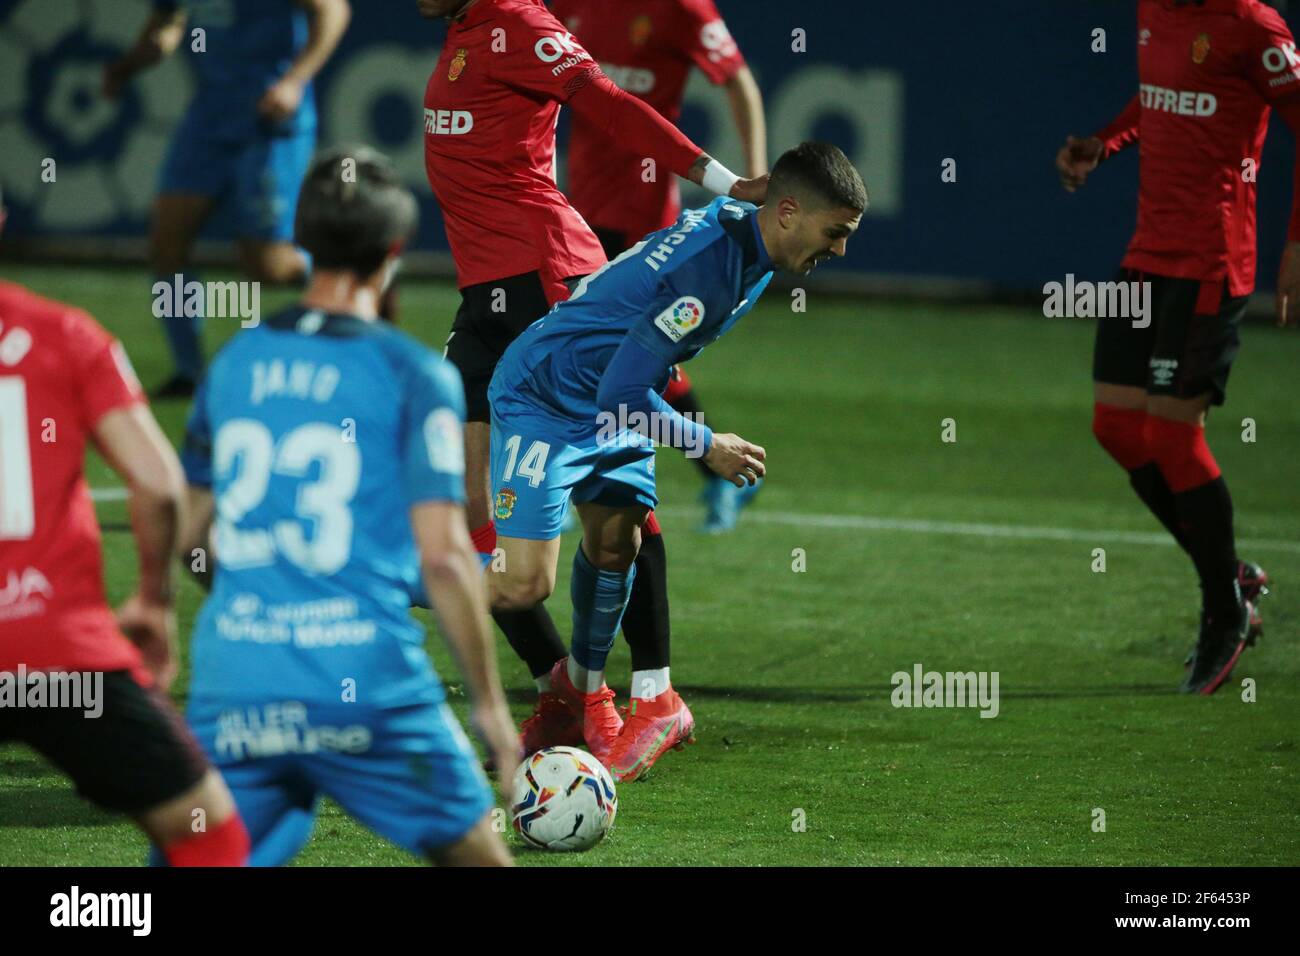 Fuenlabrada, Madrid, Spain, 29.03.2021C. F. Fuenlabrada against R. C. D. Mallorca match of the second division of Spanish soccer in match 31. Fuenlabrada player Oscar Pichi get foul and penalty Final score 4-1 winner Fuenlabrada with goals from the players Oscar Pichi 13 y 38  Nteka 41  and Pathe Ciss 73  Mallorca scores his player Mboula 56  Photo: Juan Carlos Rojas/Picture Alliance | usage worldwide Stock Photo